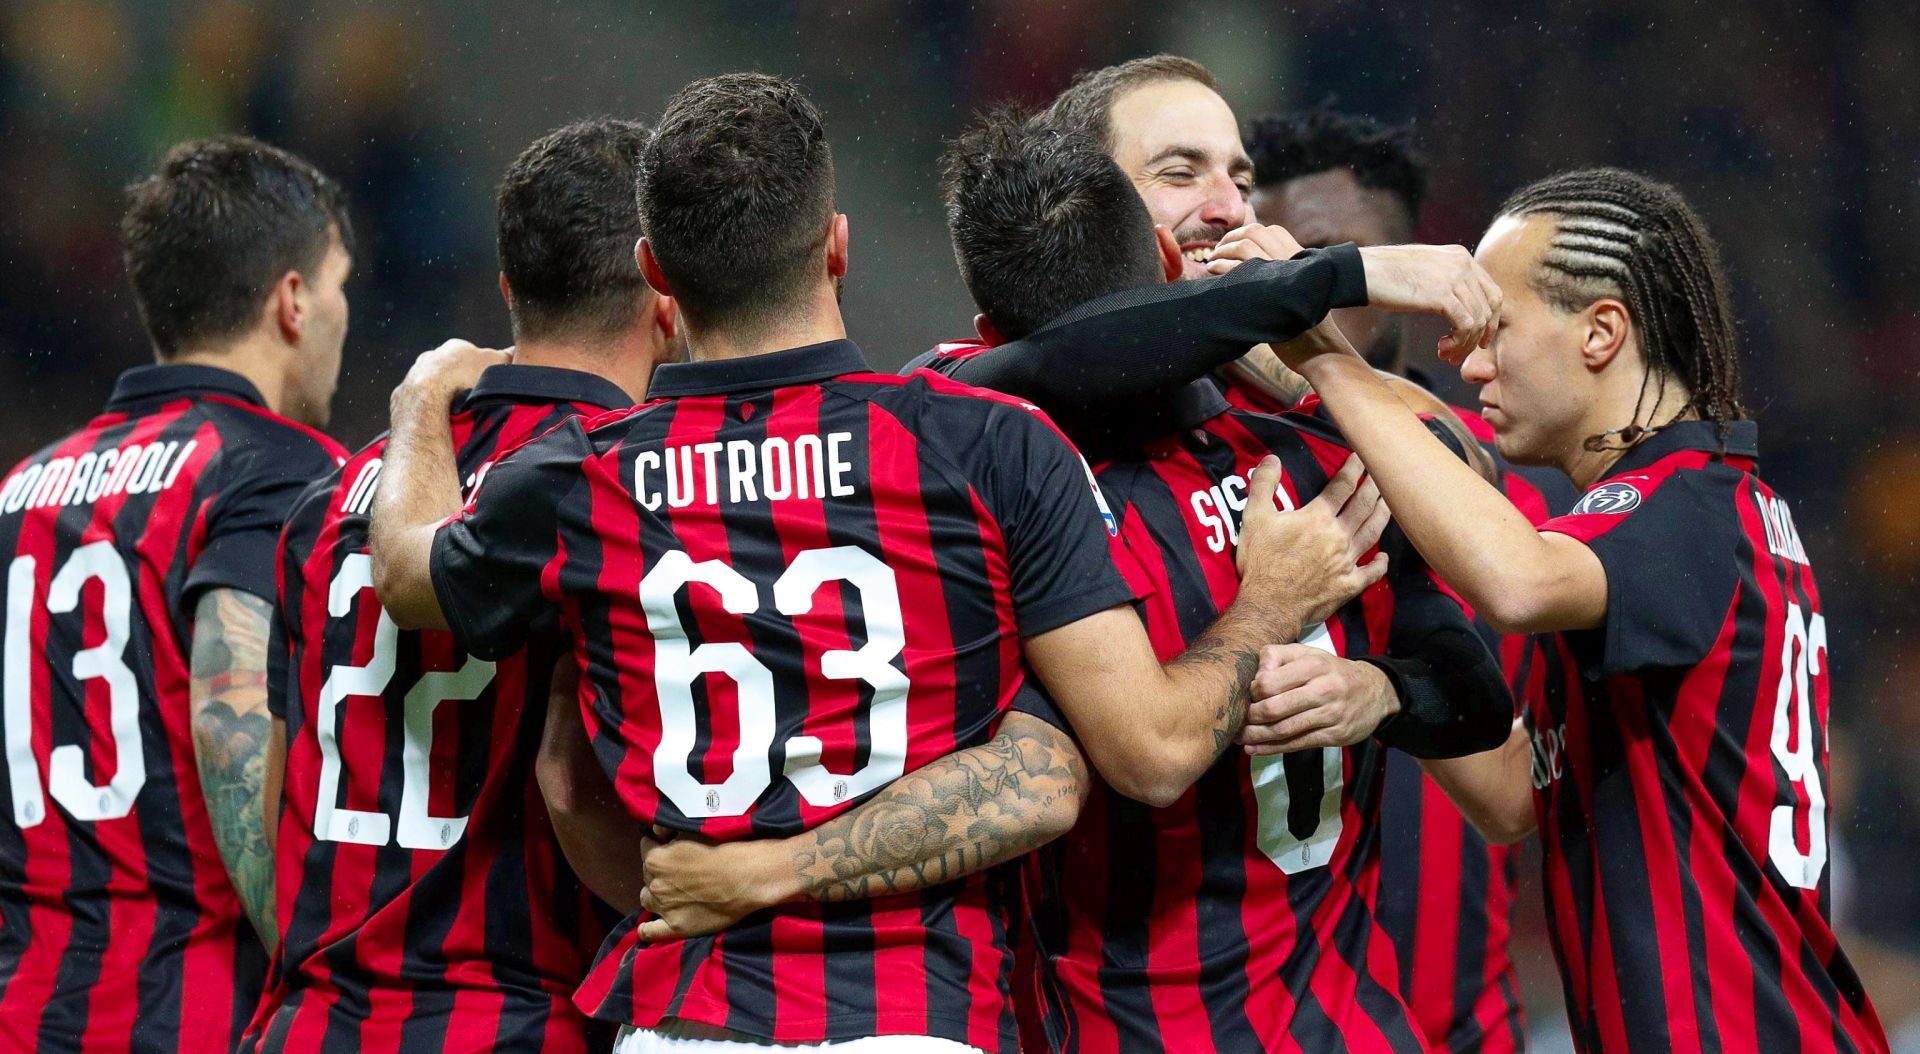 epa07133992 Milan's Suso (C-R) celebrates with his teammates after scoring the 1-0 lead during the Italian Serie A soccer match between AC Milan and Genoa CFC in Milan, Italy, 31 October 2018.  EPA/ROBERTO BREGANI